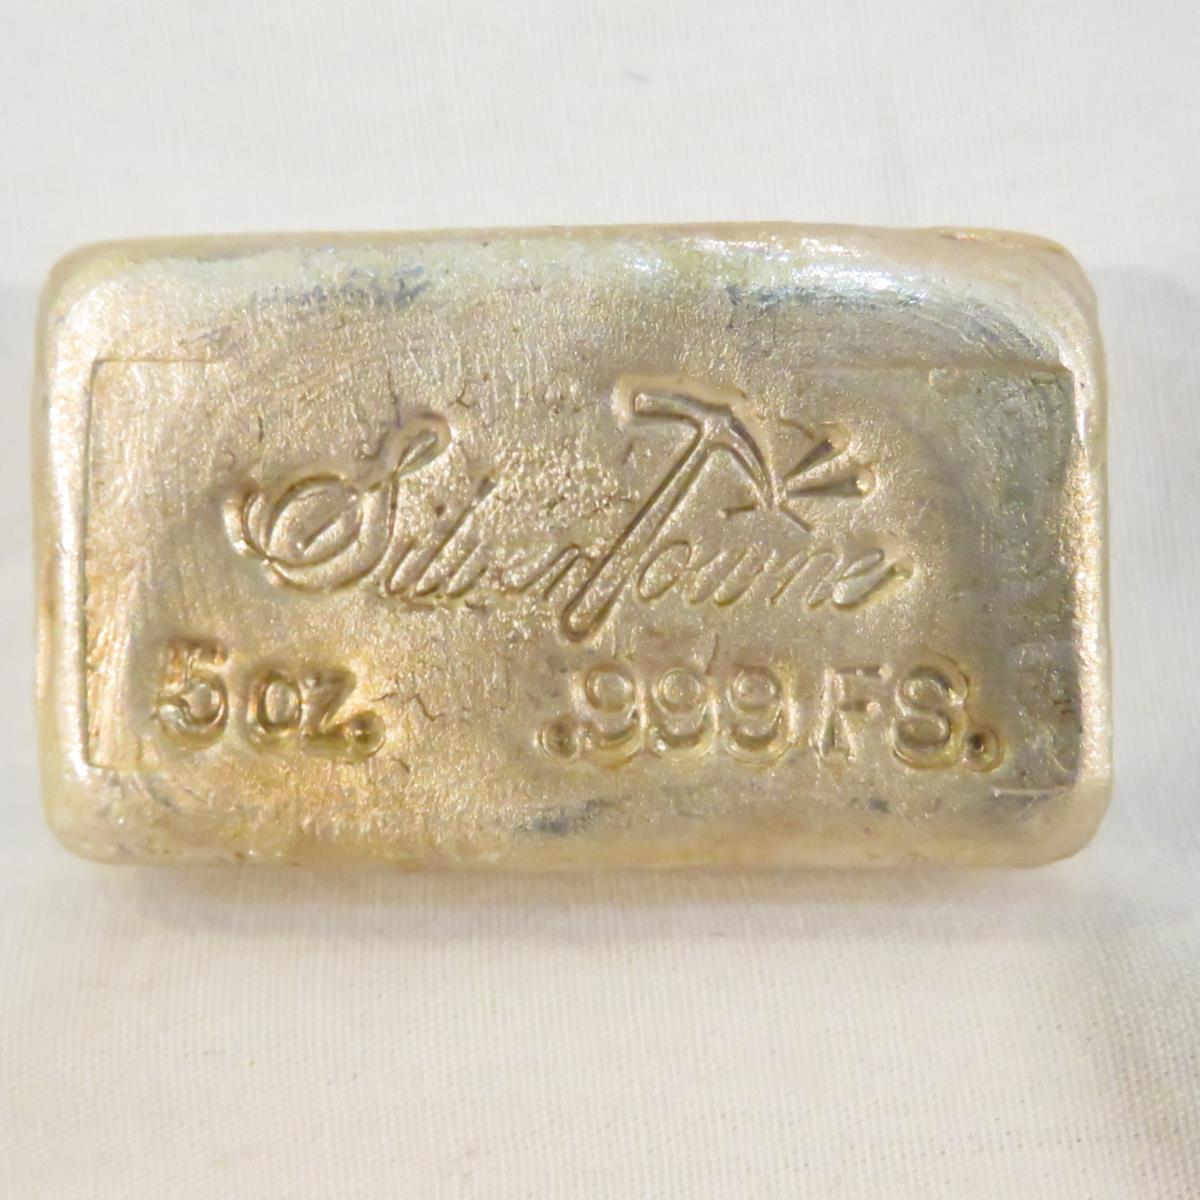 Silver Towne Old Pour 5ozt Silver Loaf Bar